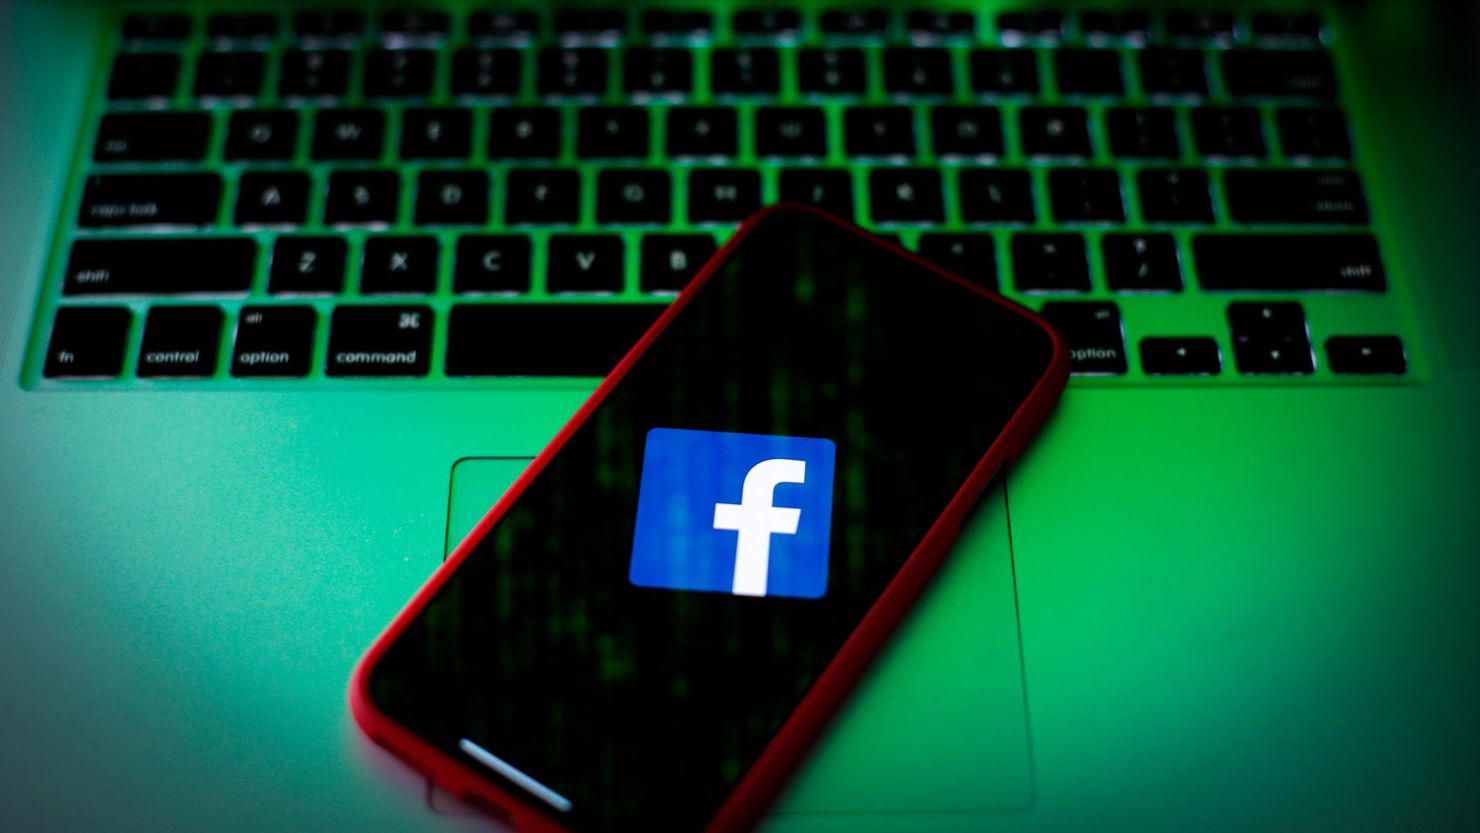 The Facebook logo is seen on a mobile device in this photo illustration on January 20, 2019. (Photo by Jaap Arriens/NurPhoto via Getty Images)